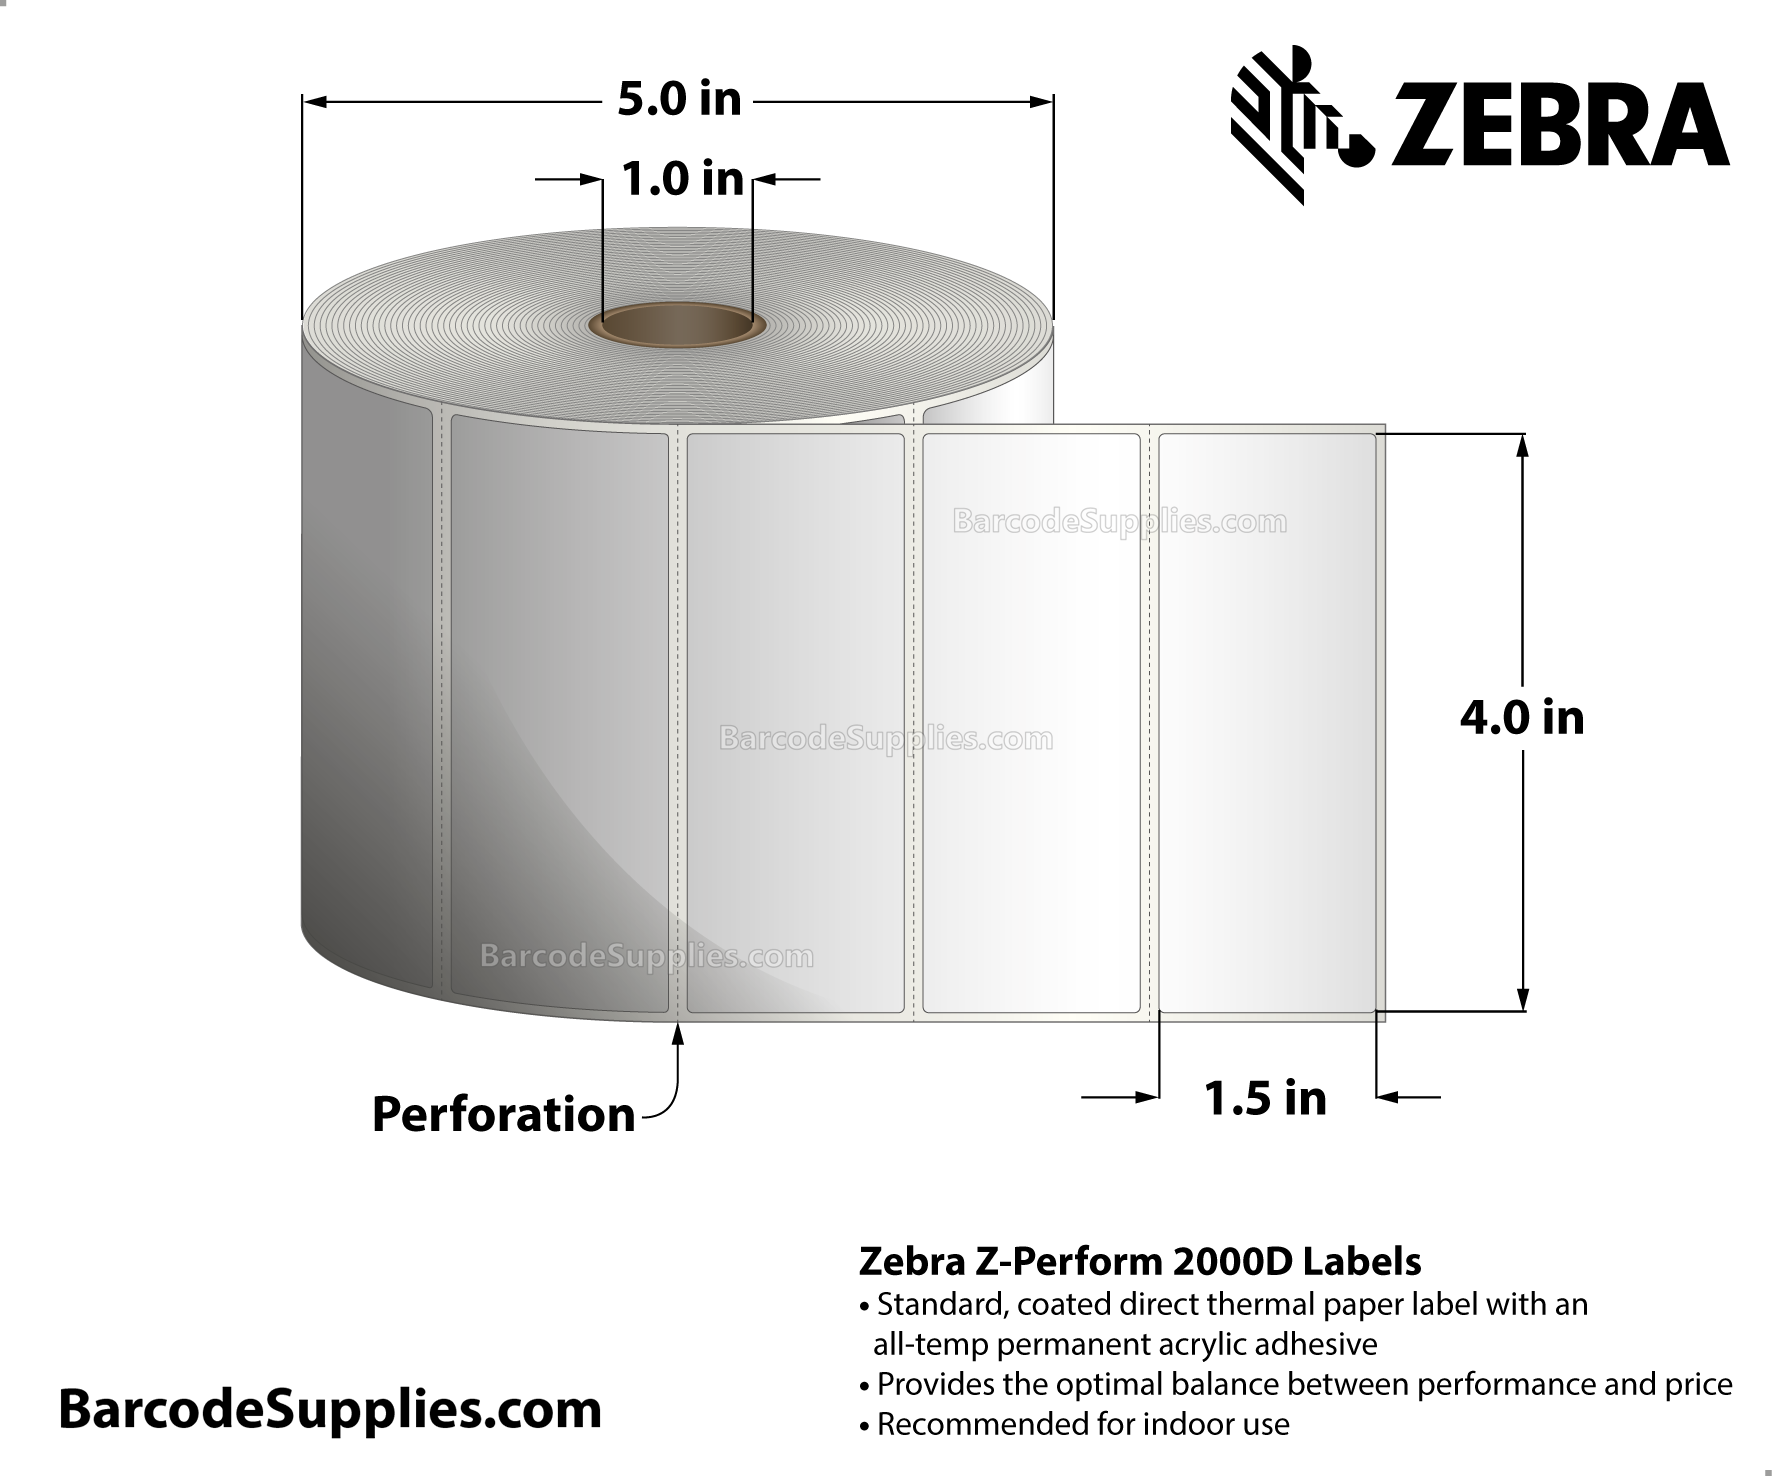 4 x 1.5 Direct Thermal White Z-Perform 2000D Labels With All-Temp Adhesive - Perforated - 1620 Labels Per Roll - Carton Of 6 Rolls - 9720 Labels Total - MPN: 10015786